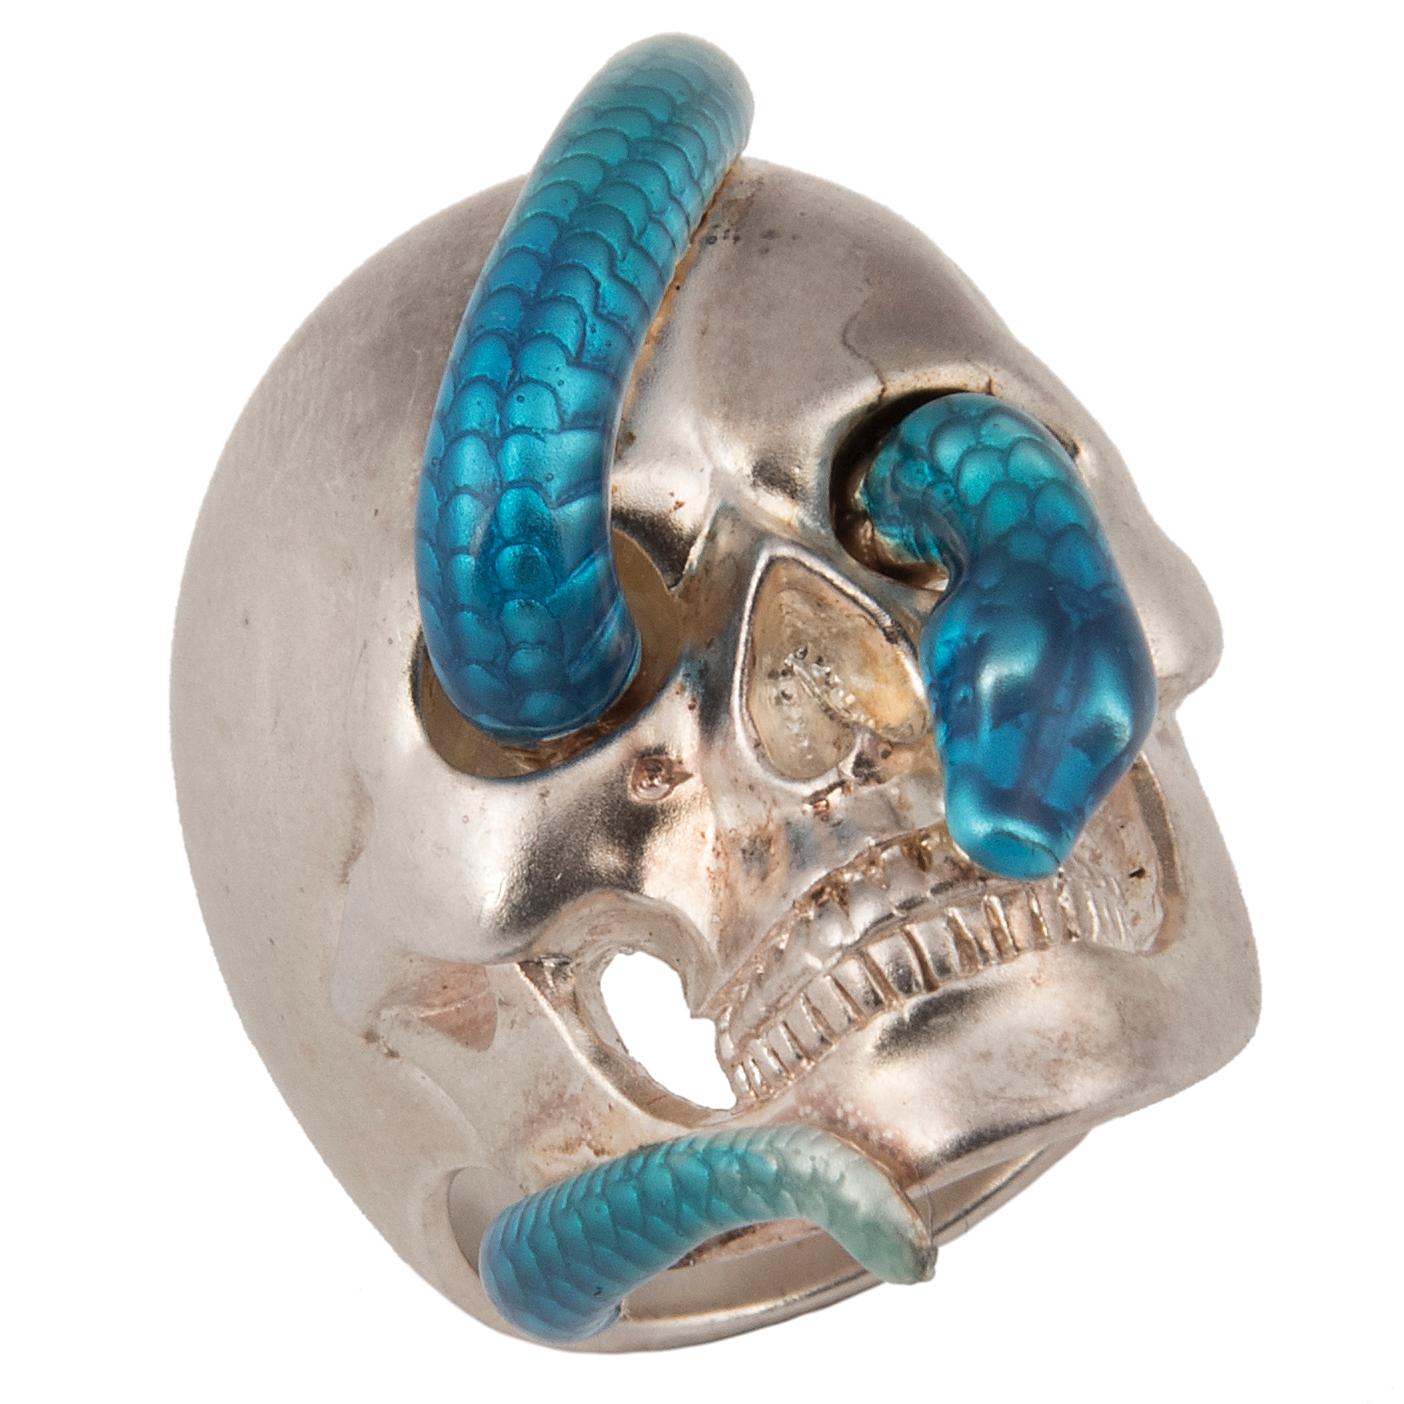 Memento Mori Ring by Theo Fennell, designed as a silver skull with a blue enamelled snake 
Stamped TF for Theo Fennel, English hallmarks
Size EU: 56, US: 78 1/4
Circa 2015

Theo Fennell is a Brittish Jewellery designer, known for his Intelligent,